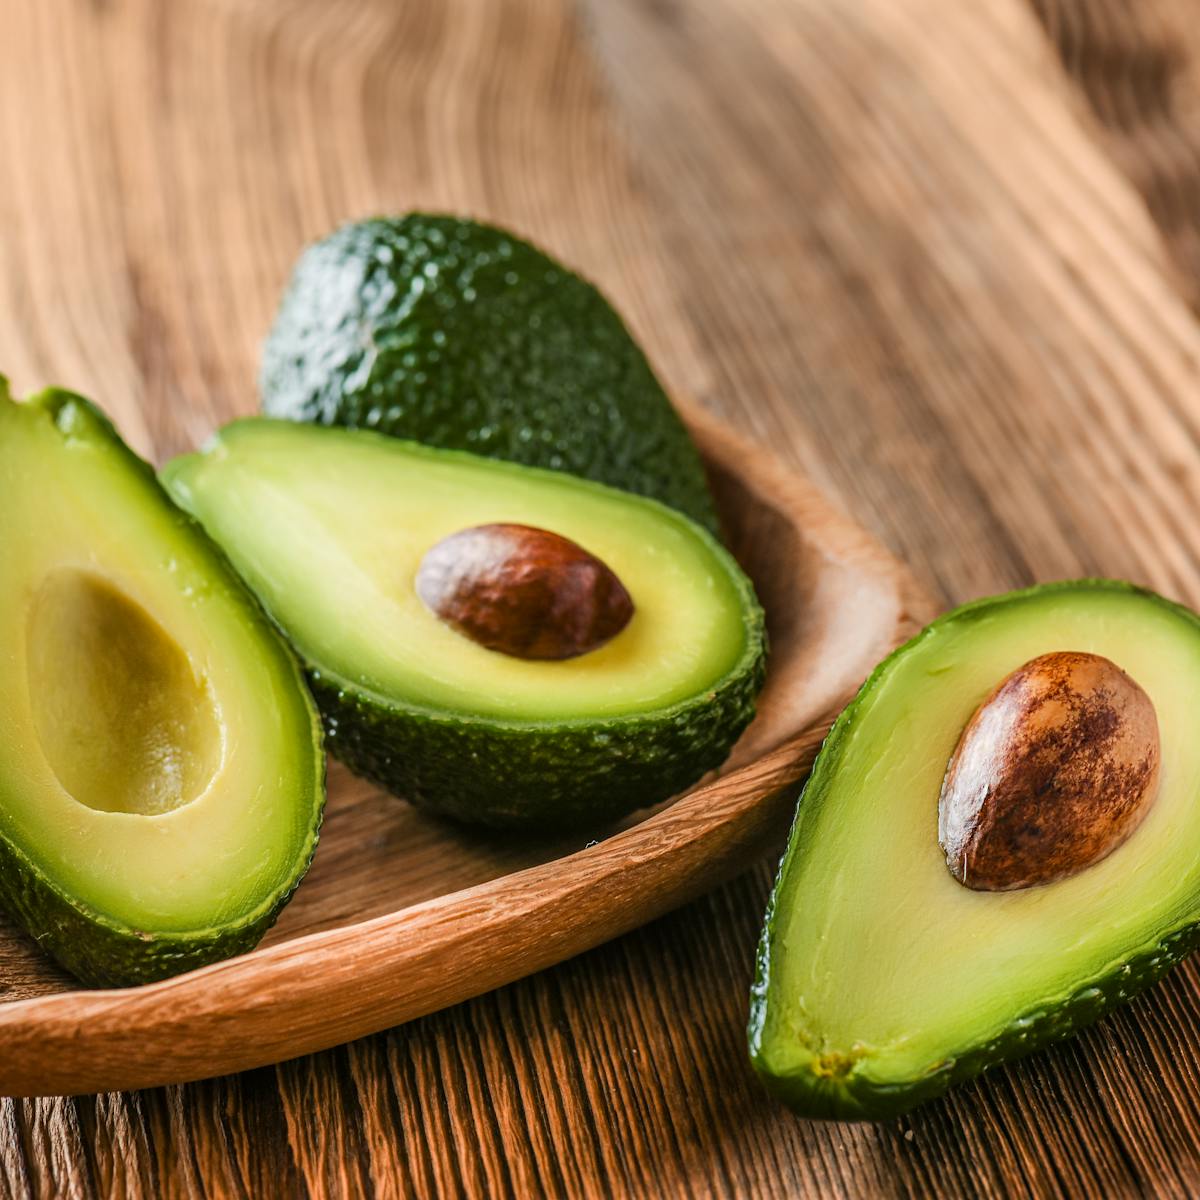 Avocados may cut the risk of heart disease – new research